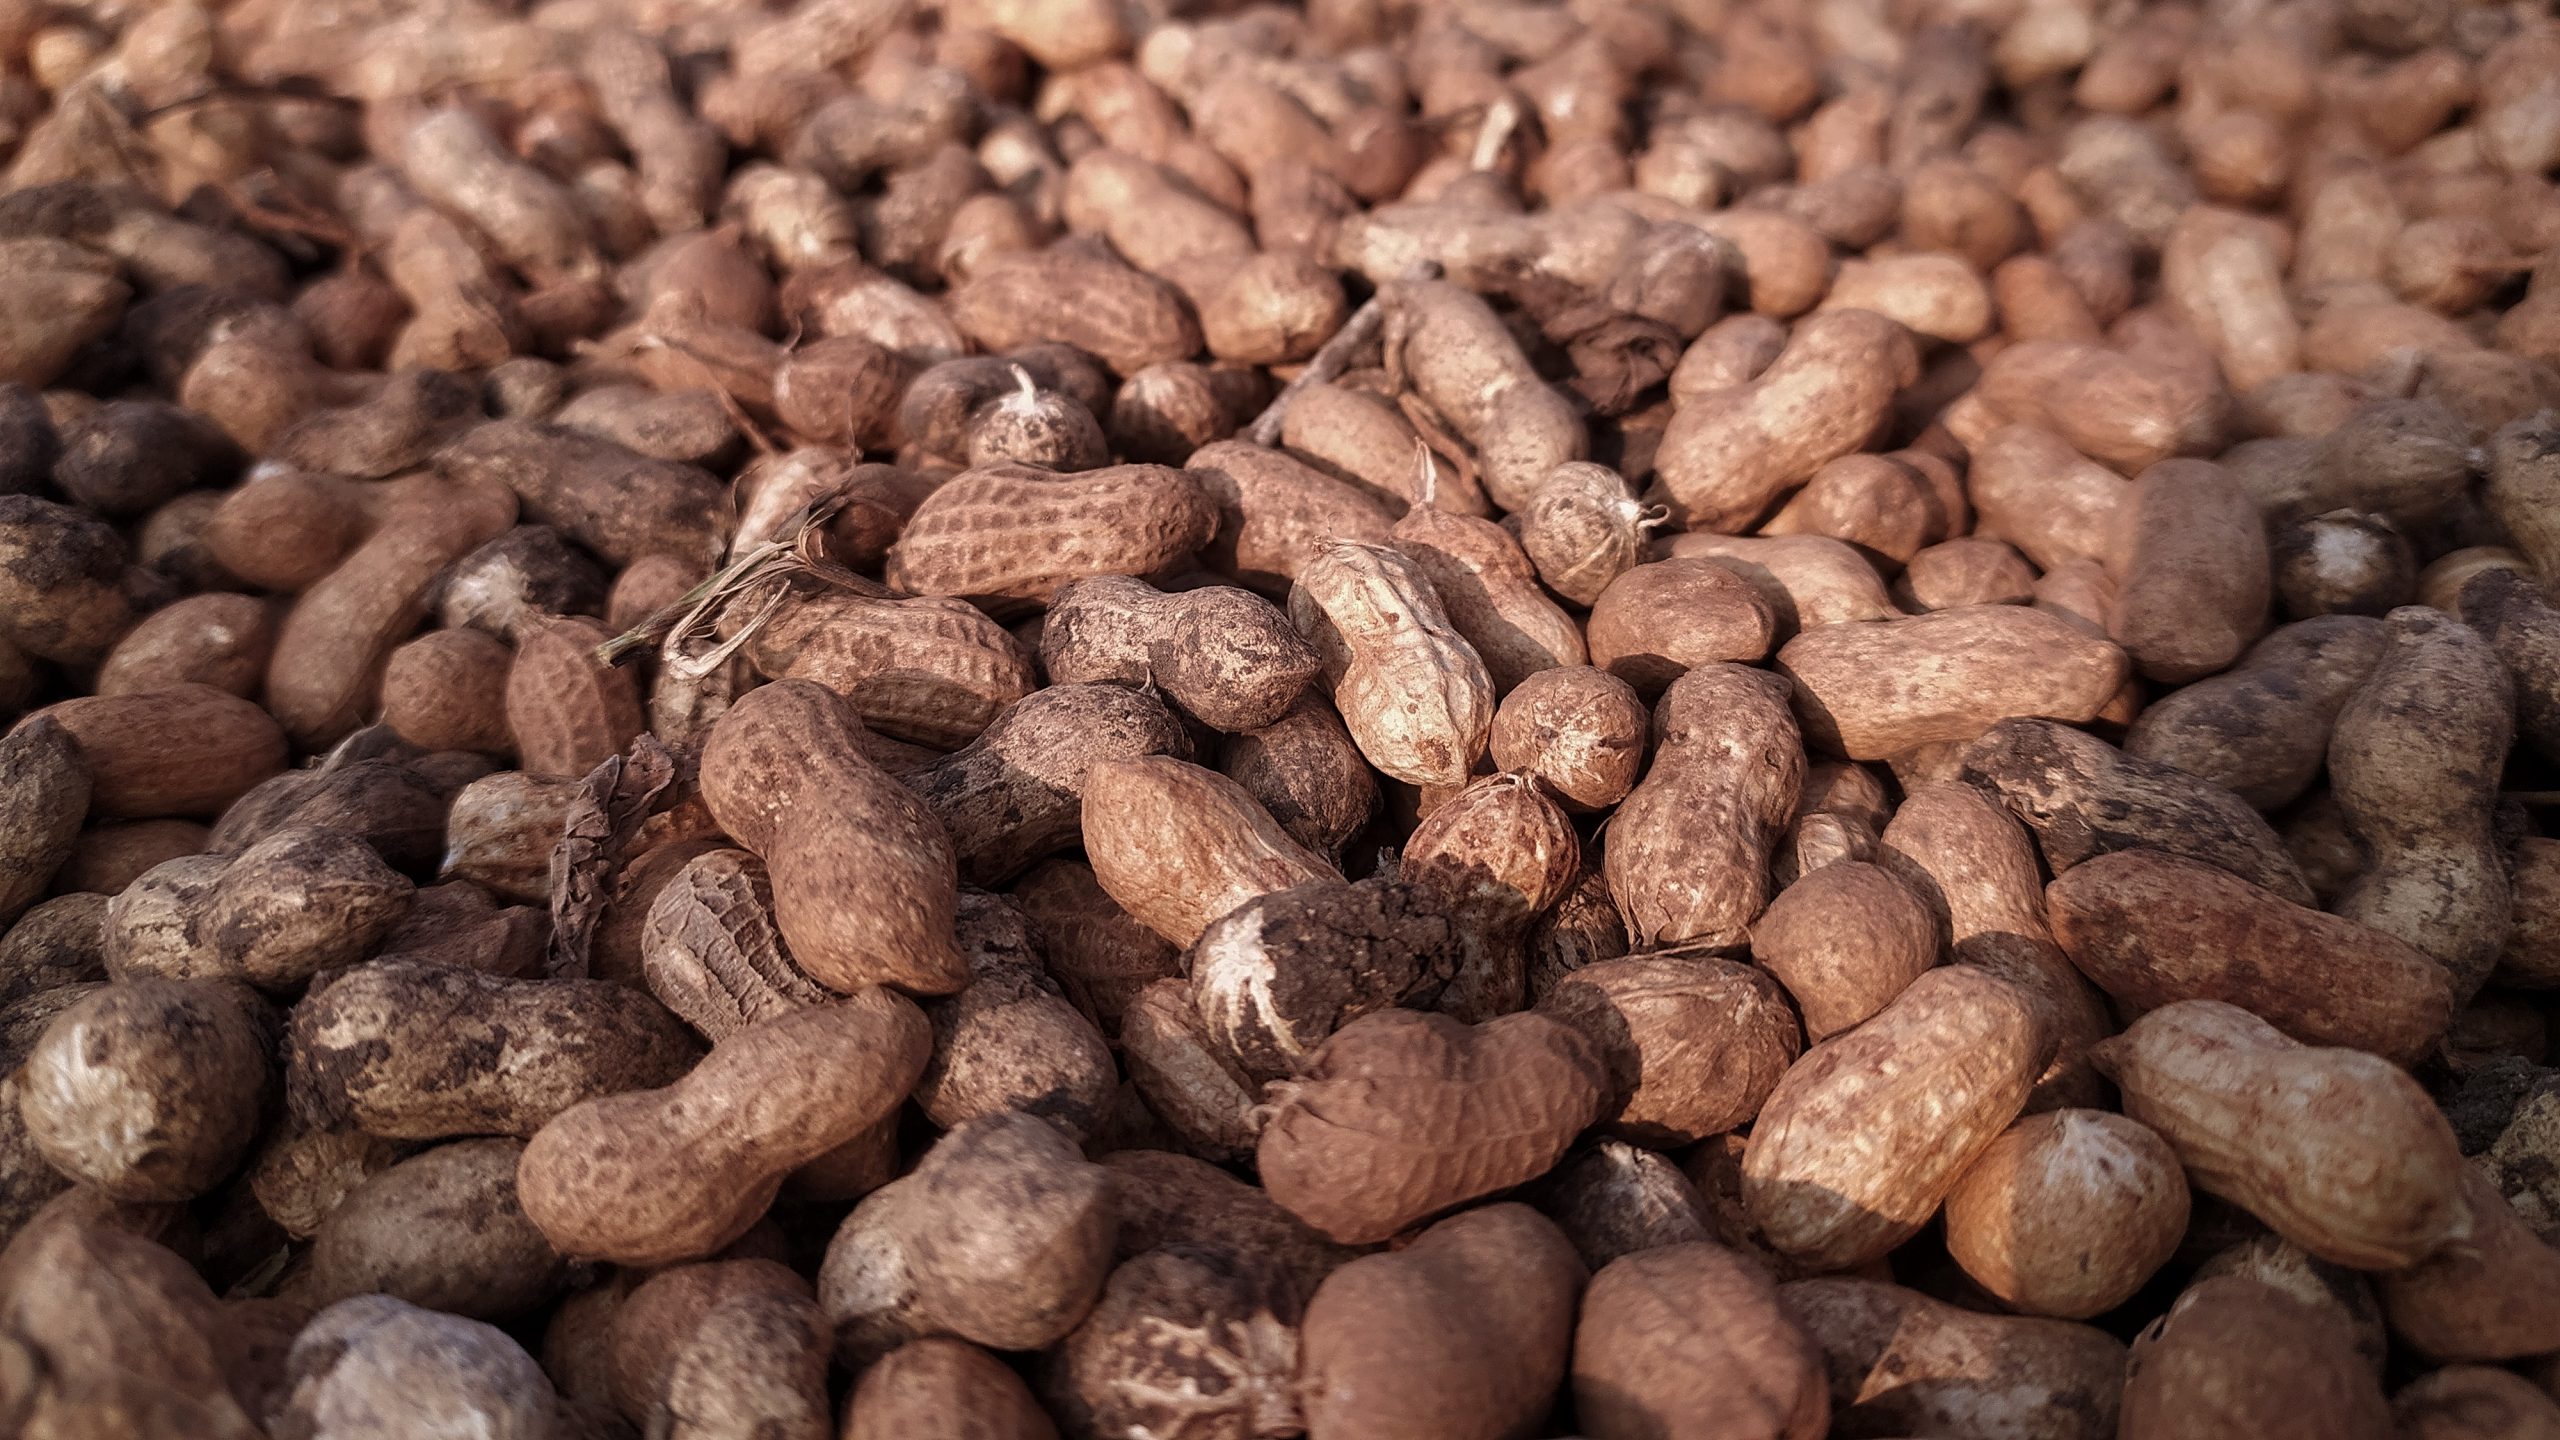 A pile of groundnuts